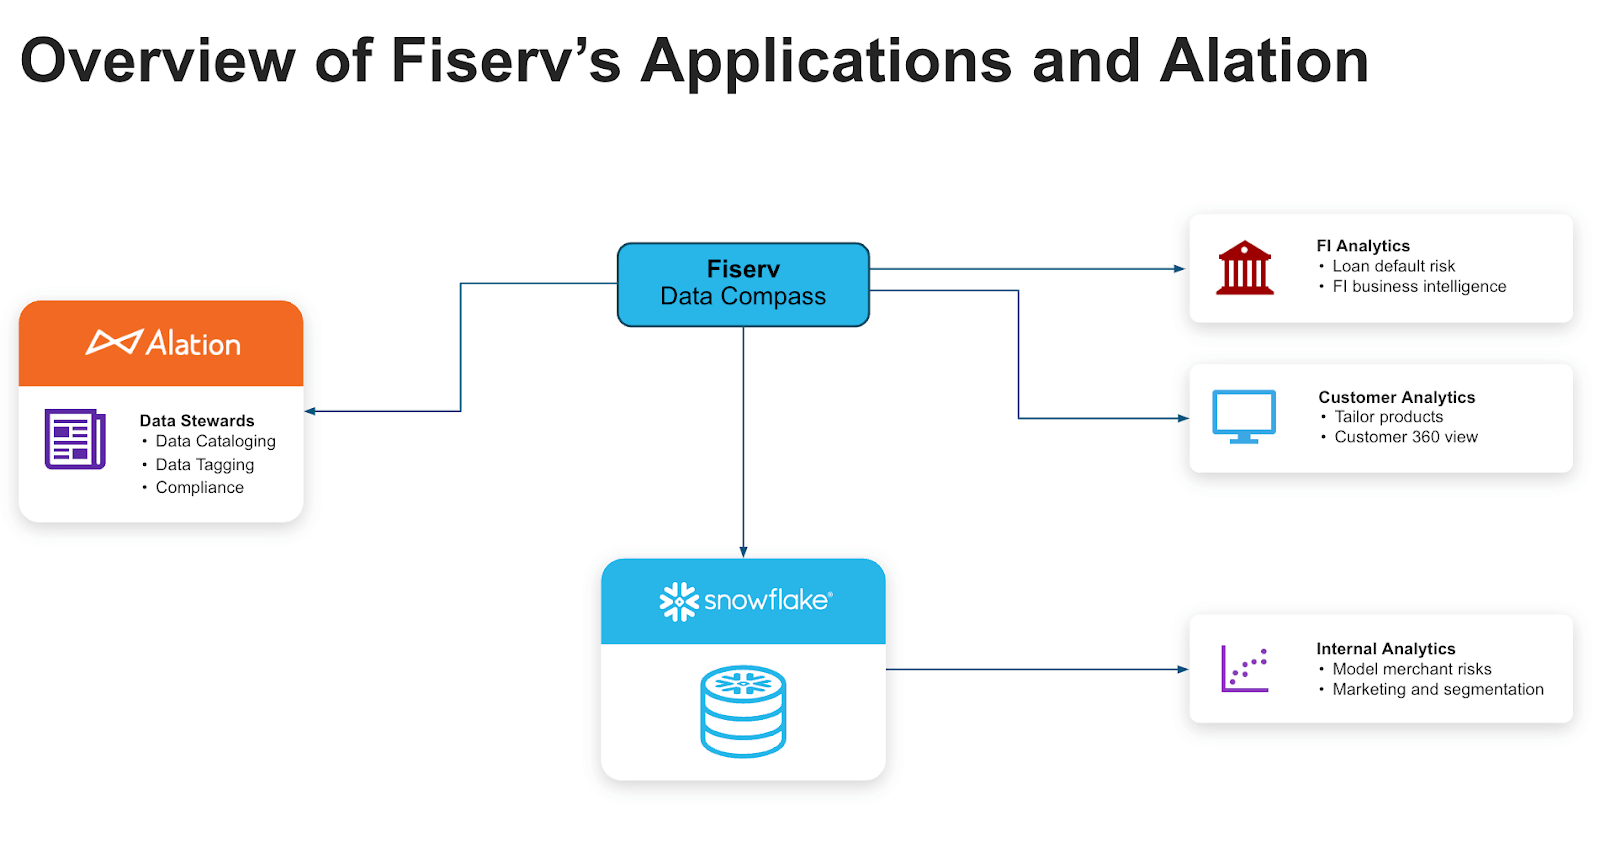 Overview of how Fiserv integrates with Alation with view into its app, Data Compass.